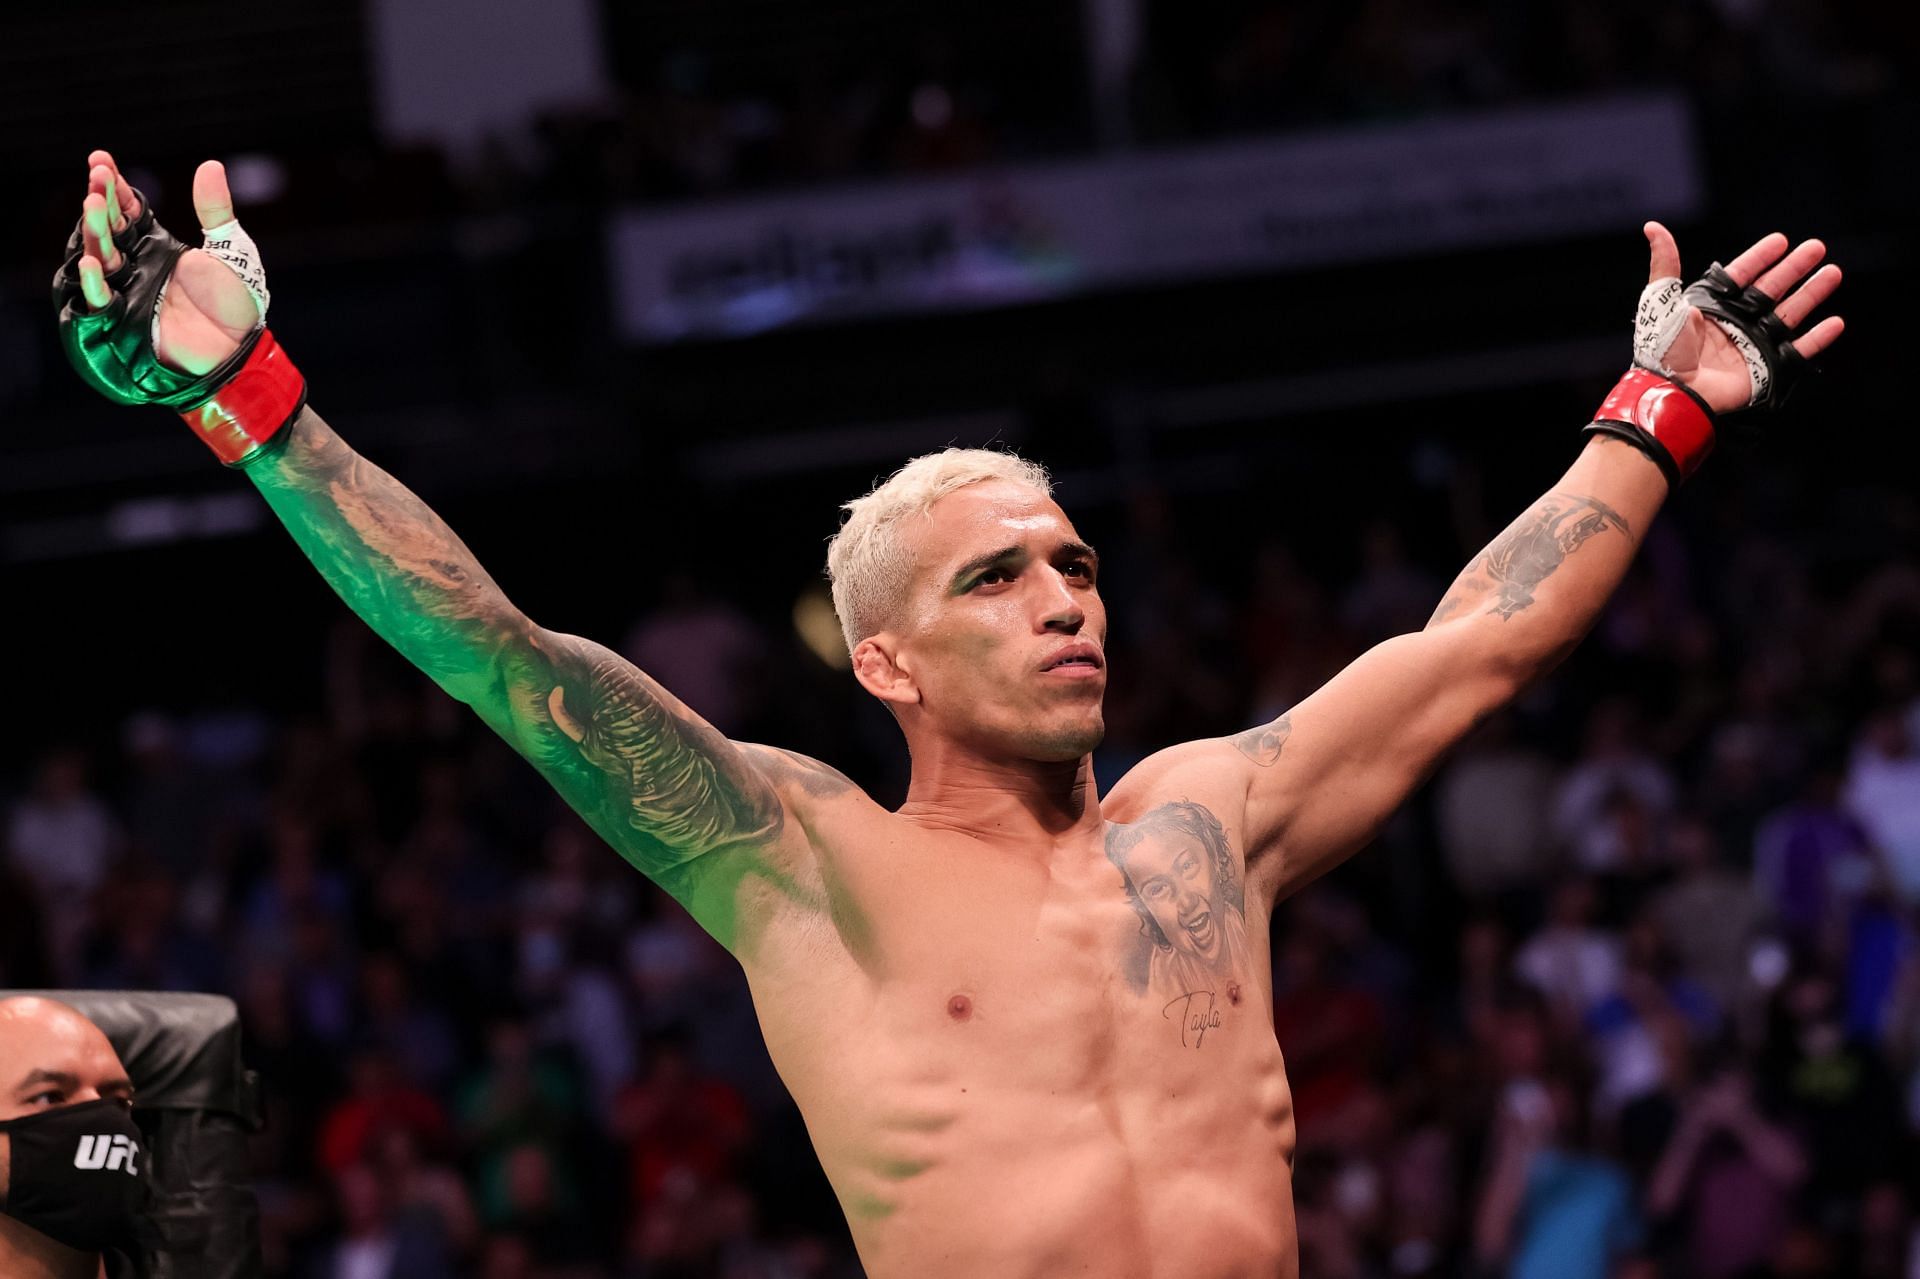 Charles Oliveira has already called for a fight with Conor McGregor